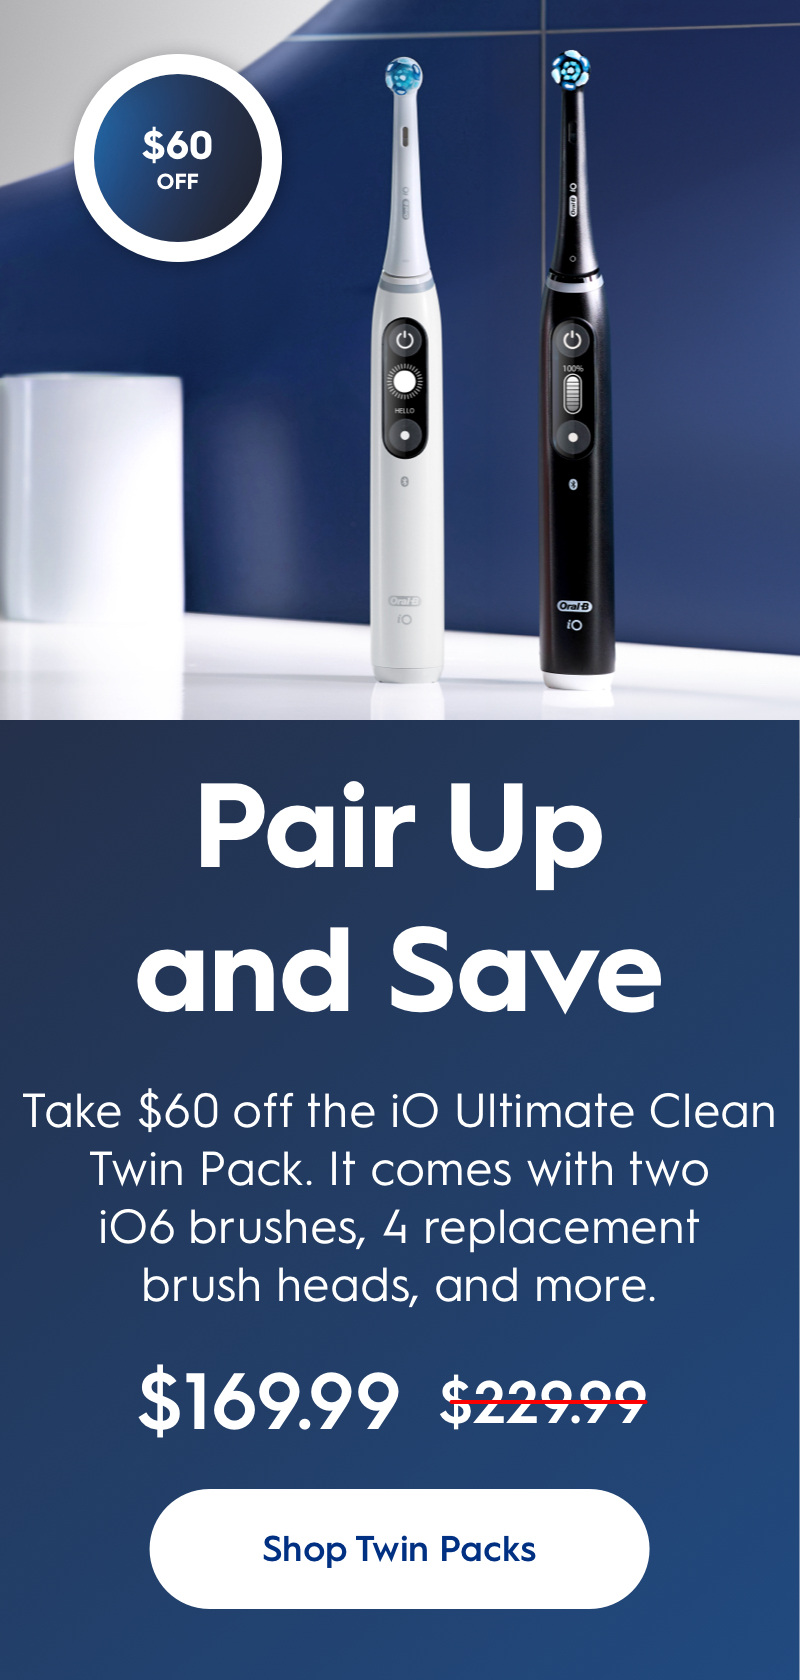 https://cdn11.bigcommerce.com/s-2idmiil7bp/product_images/uploaded_images/oral-b-homepage-m-010424-011024-io-ultimate-clean-twin-pack-60-off-2x.jpg